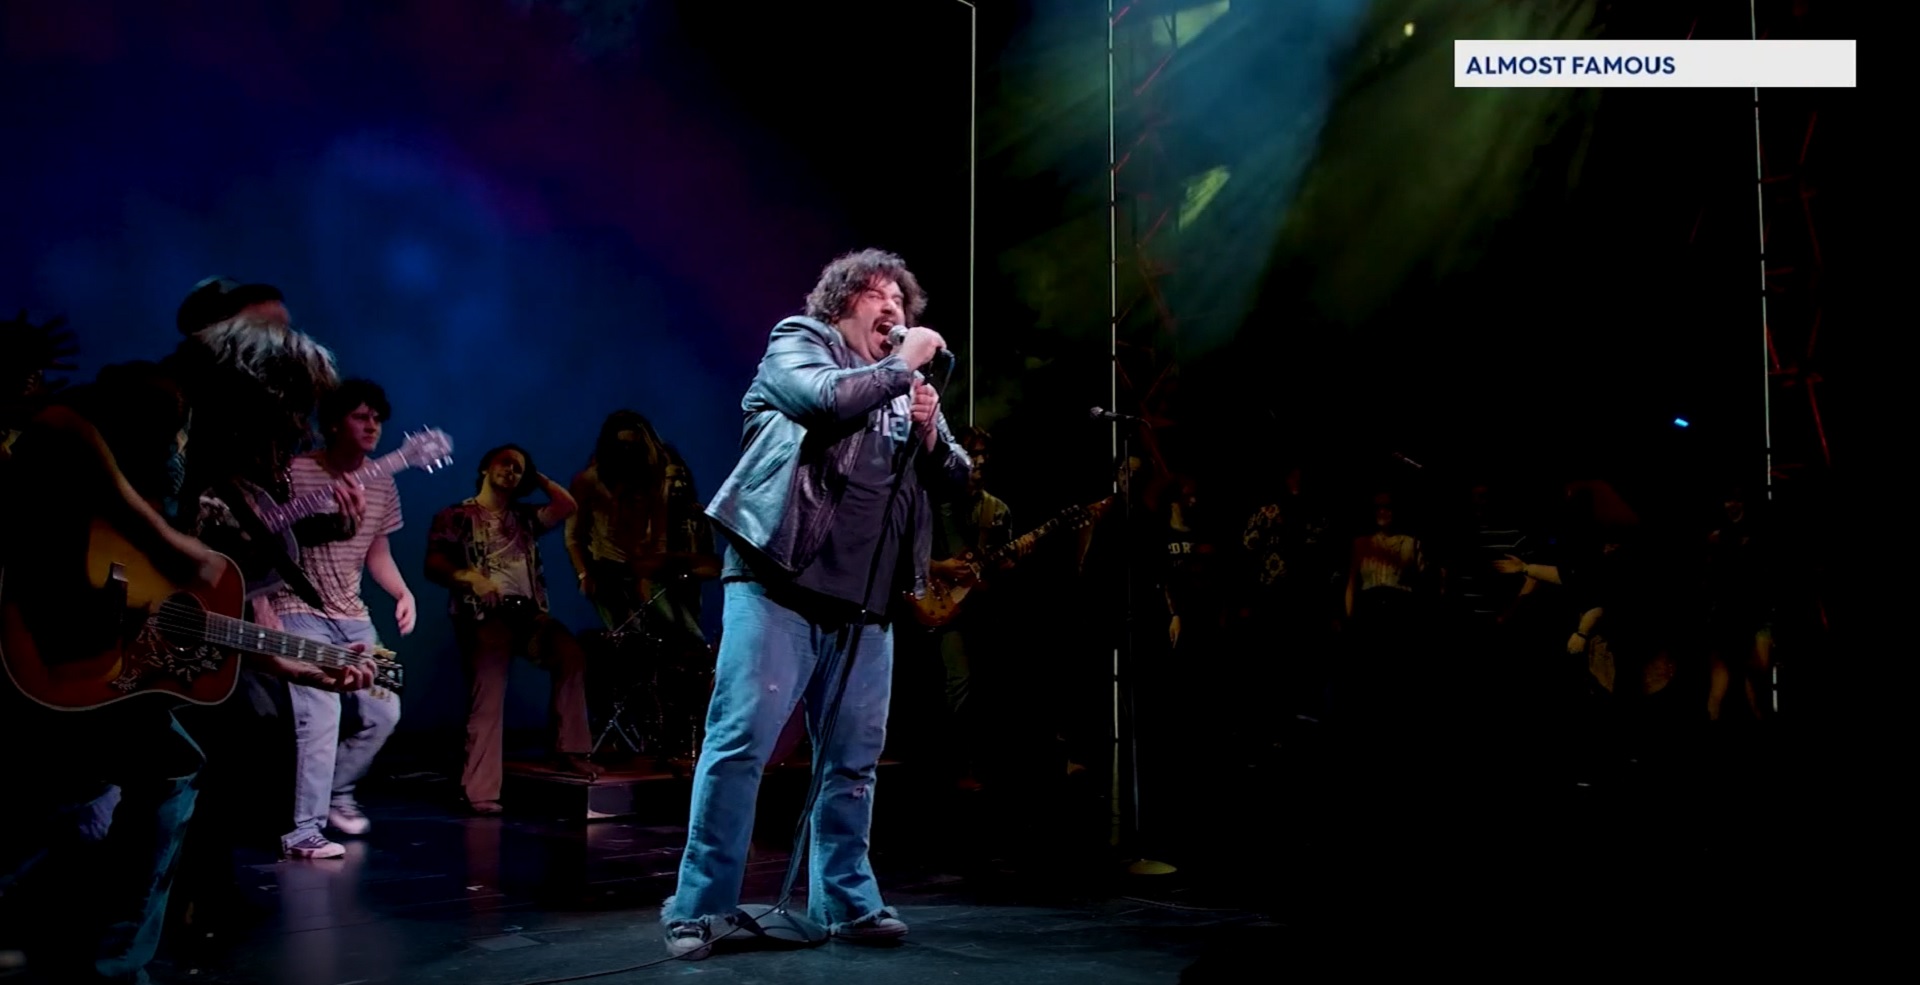 Cameron Crowe's 'Almost Famous' now a Broadway musical